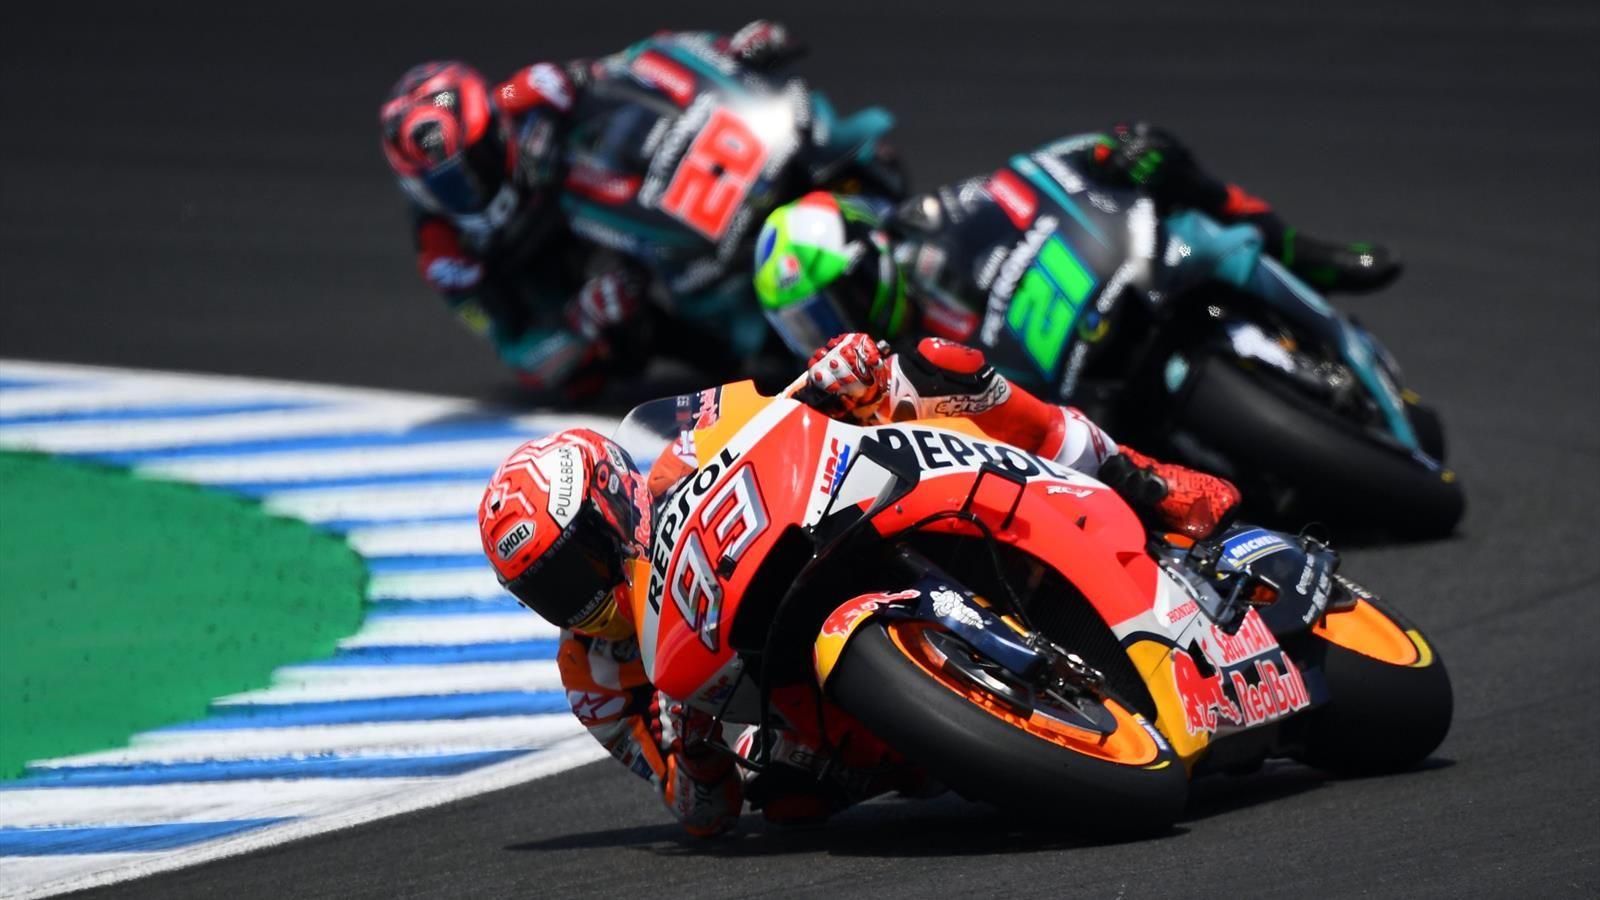 MotoGP champion Marquez goes top after win in Spain